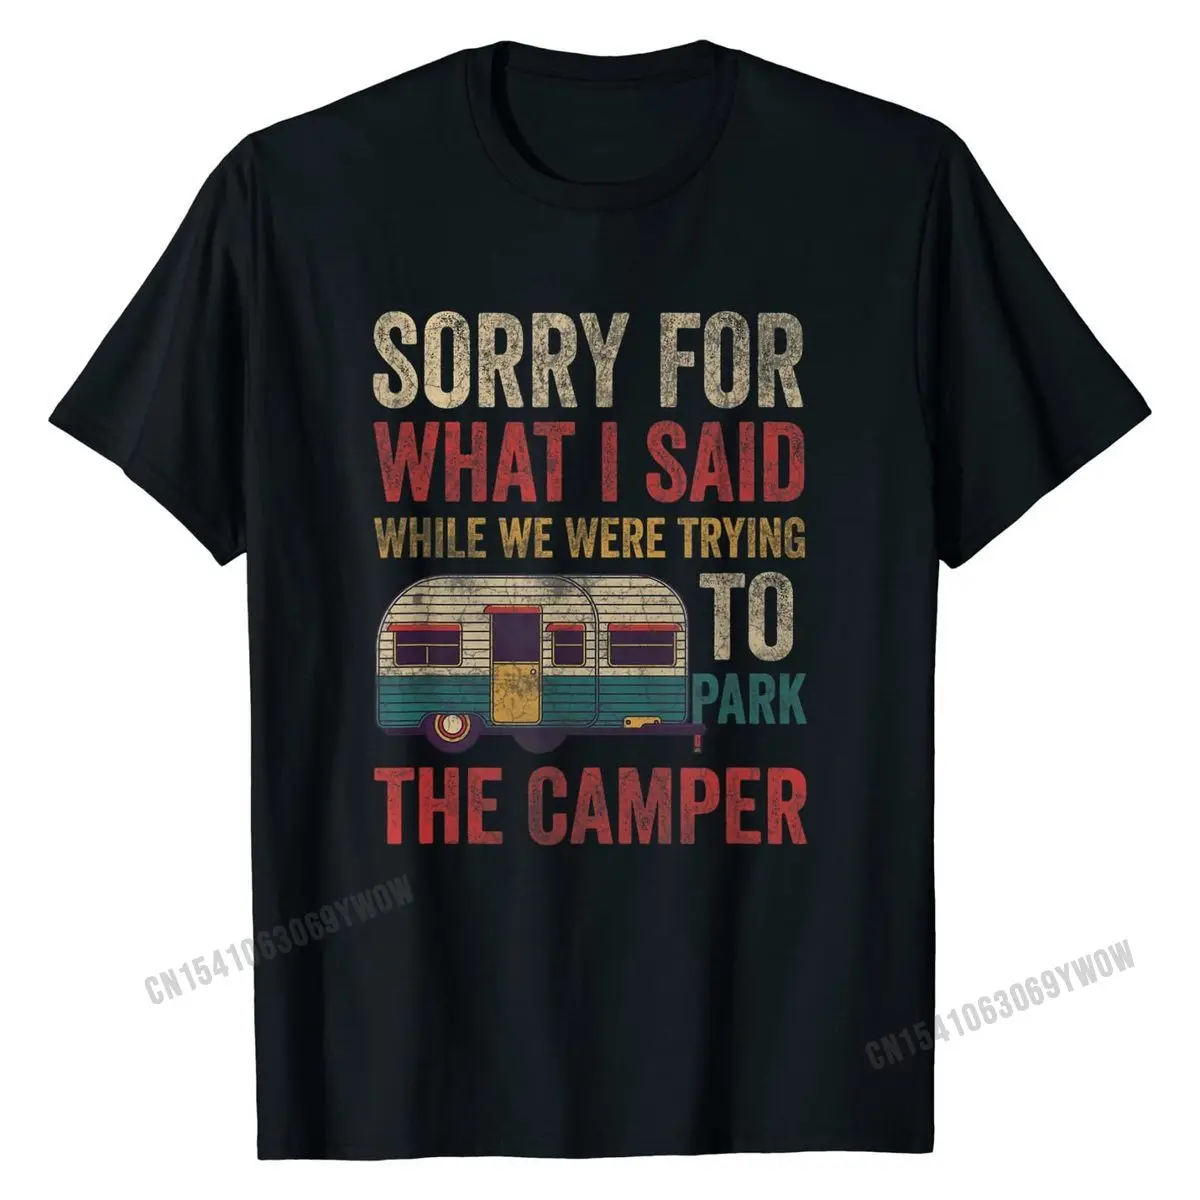 Vintage Sorry For What I Said While Parking The Camper RV T-Shirt Funny Top T-shirts Cheap Cotton Men T Shirt Family